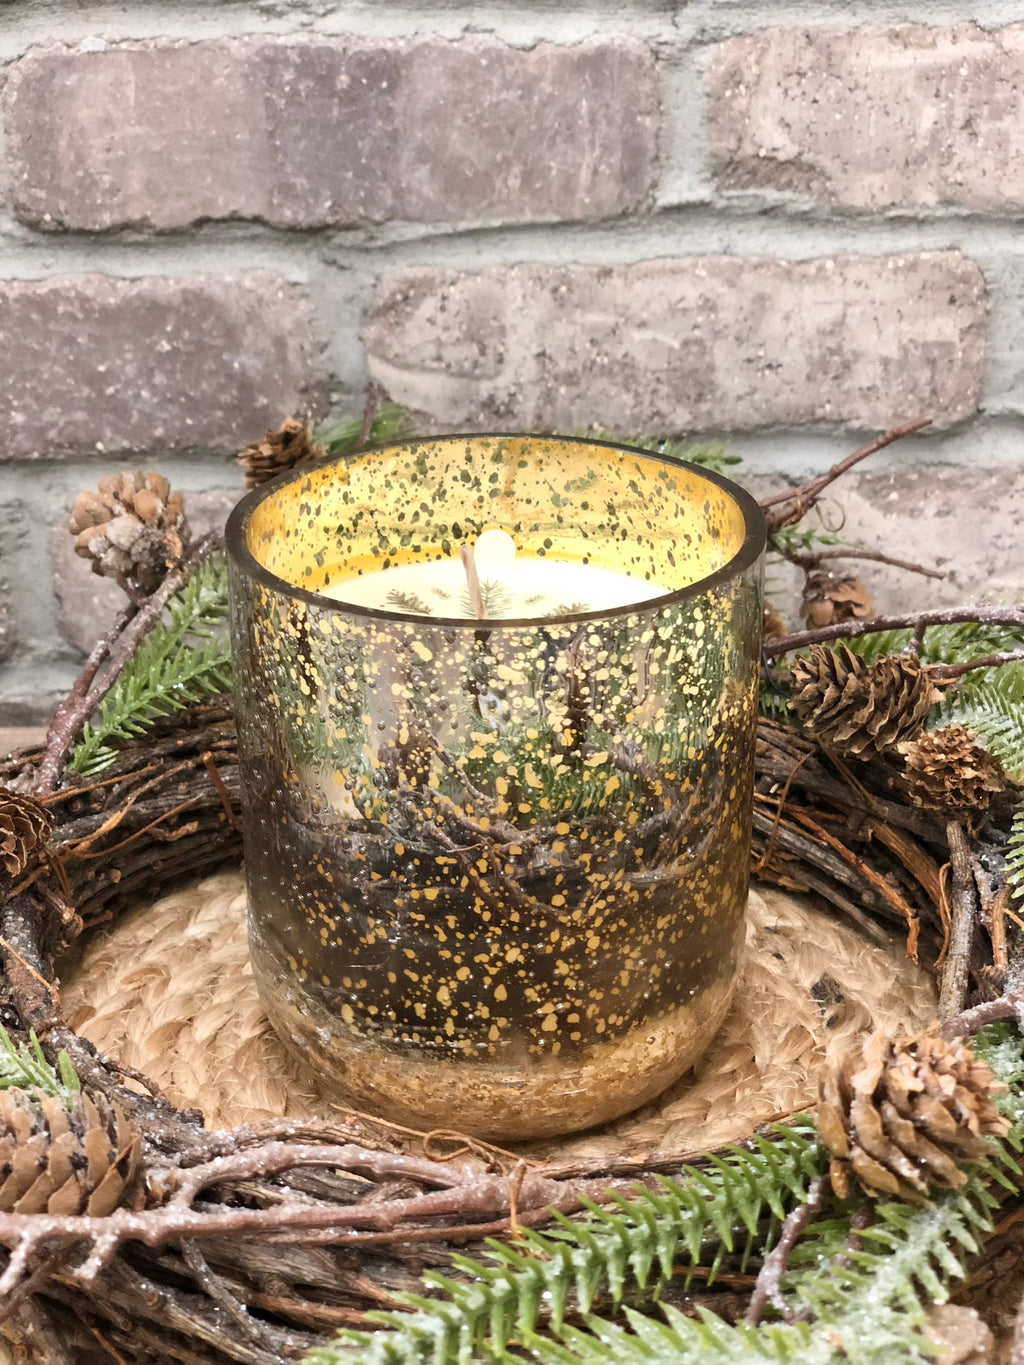 Winter White Radiant Glass Candle